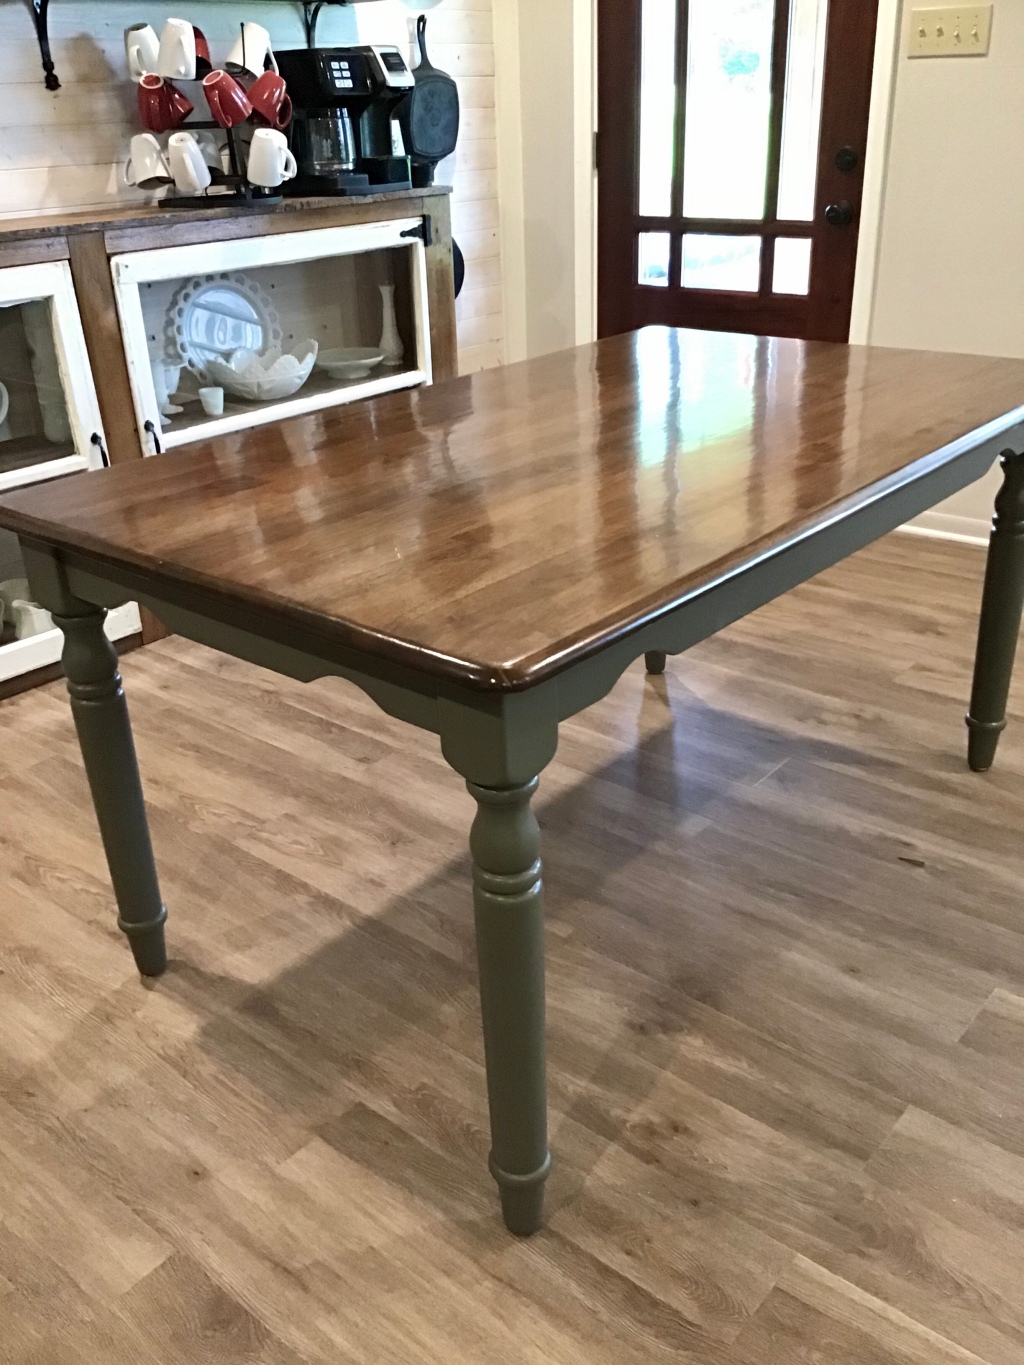 Updating a 1990’s Butcher Block Table